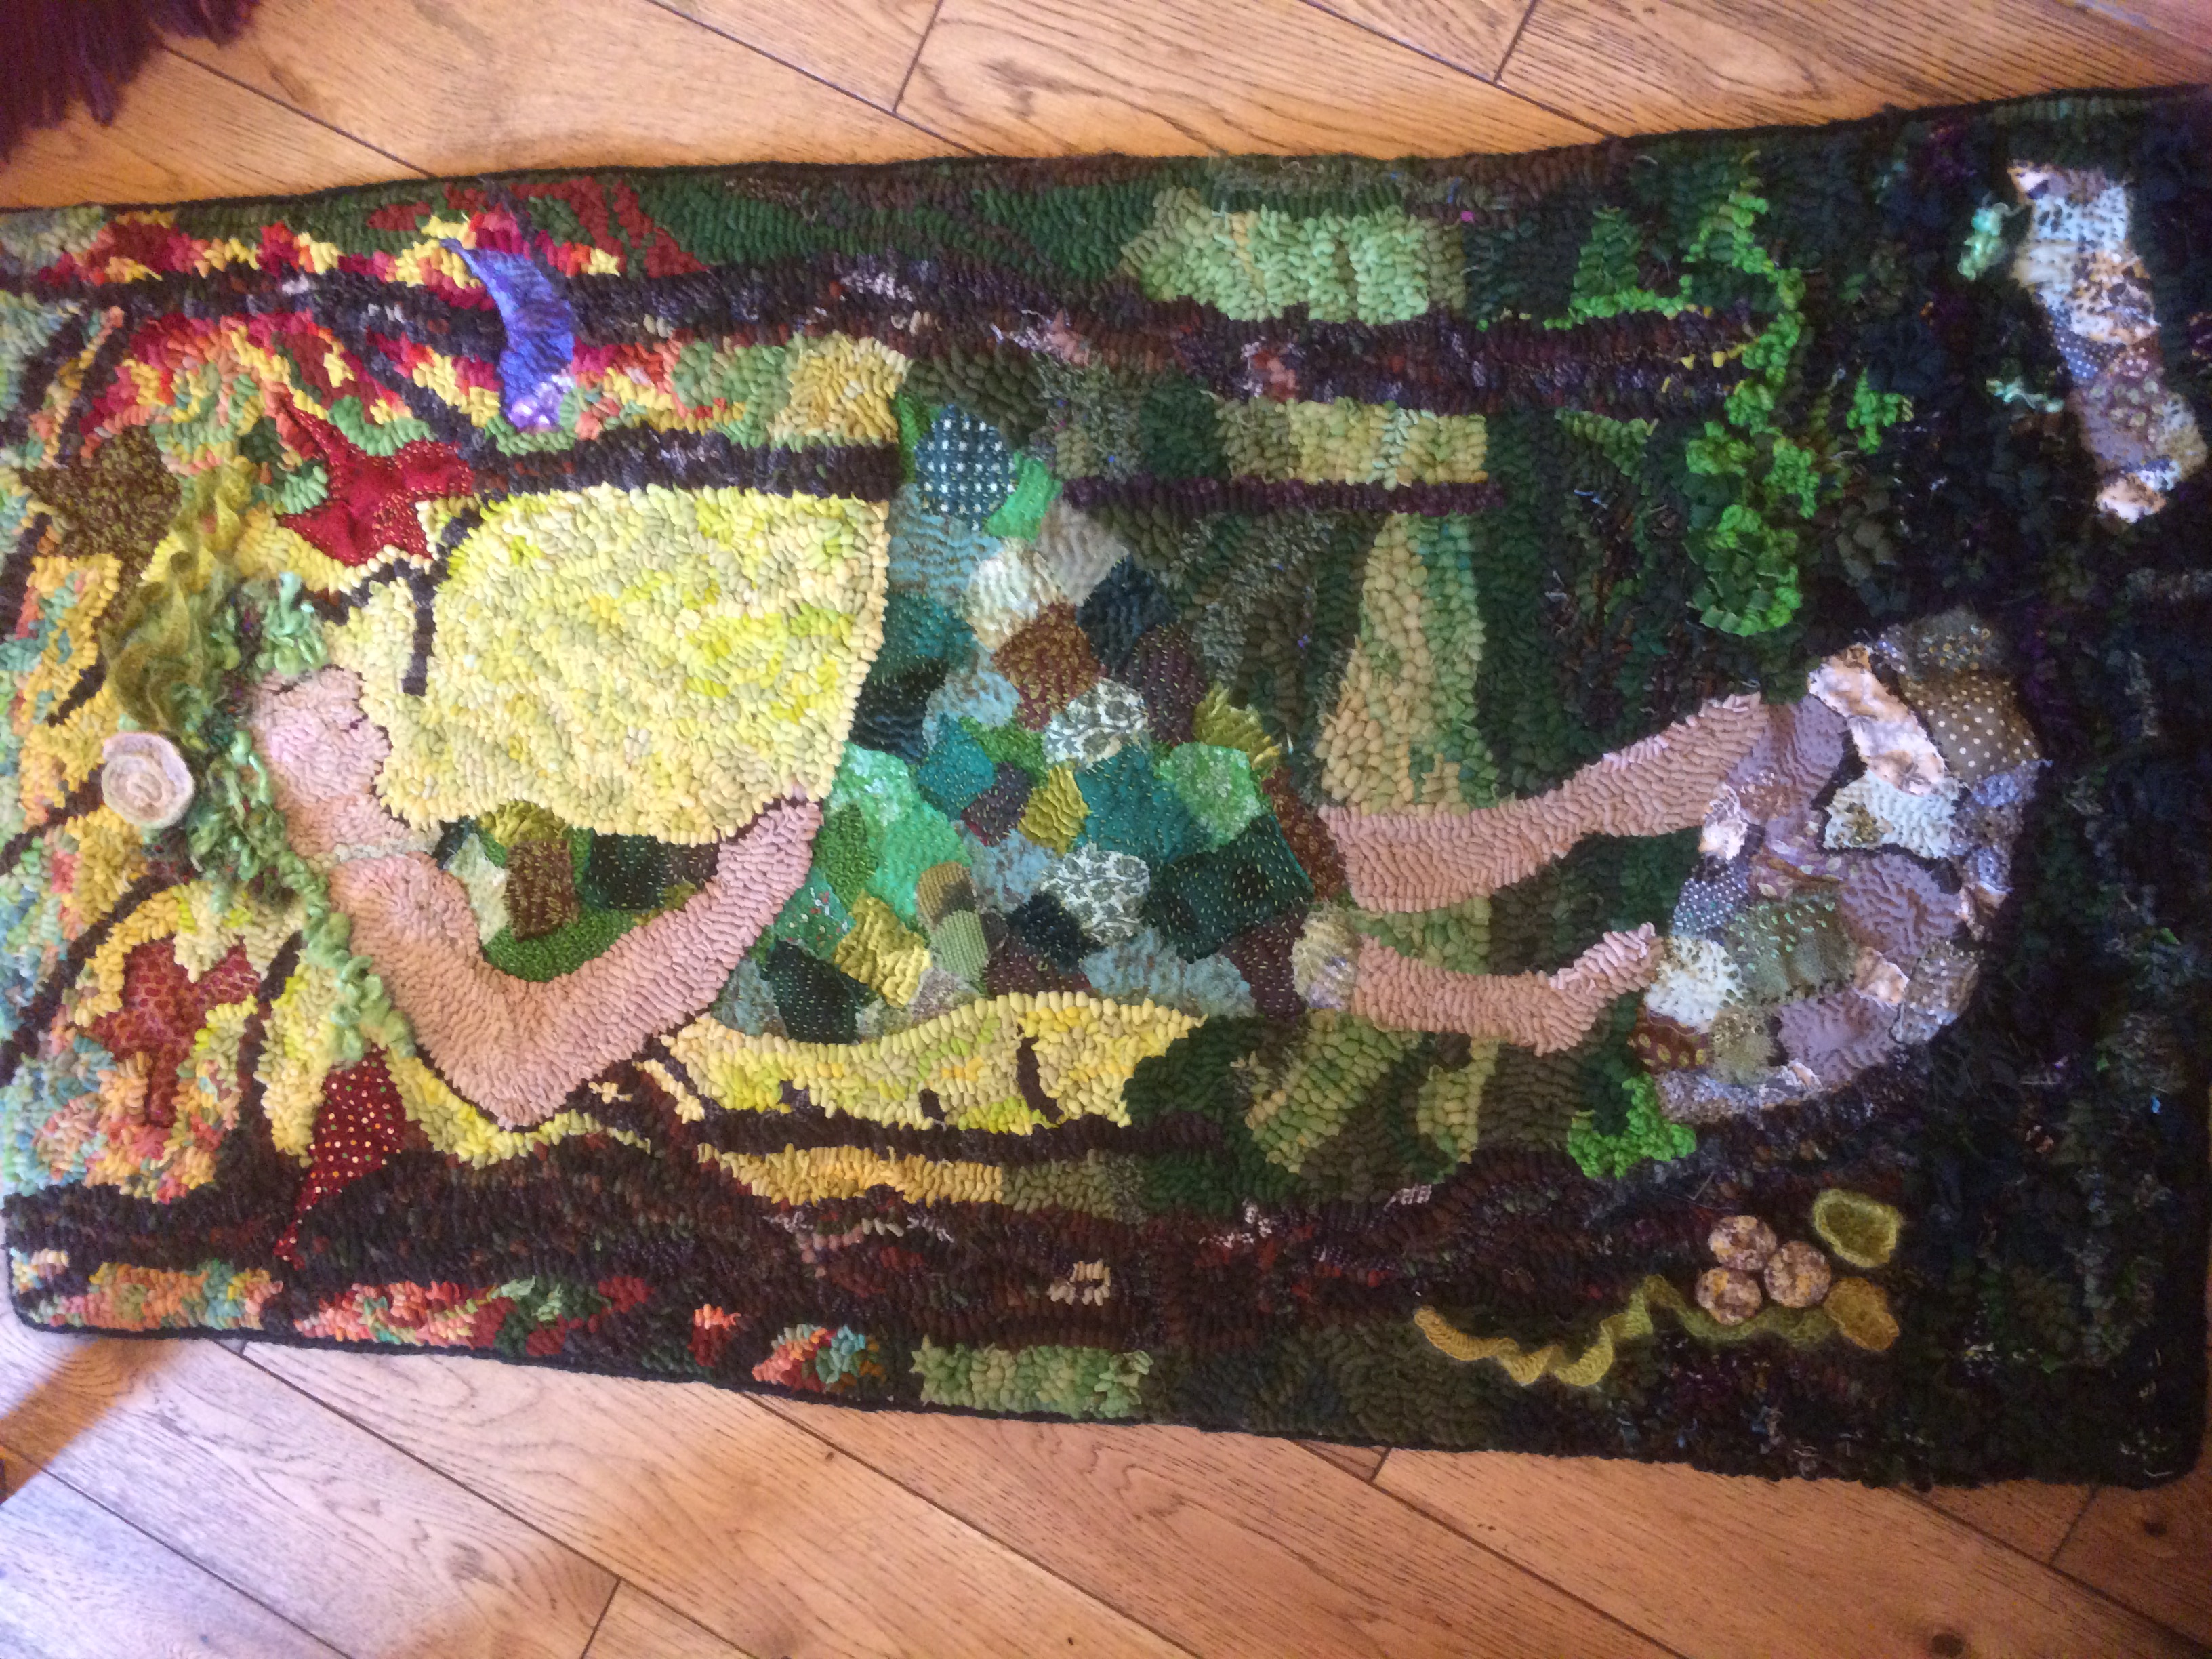 Intricate Rag Rug Design of a lady with patchwork skirt done in the loopy style